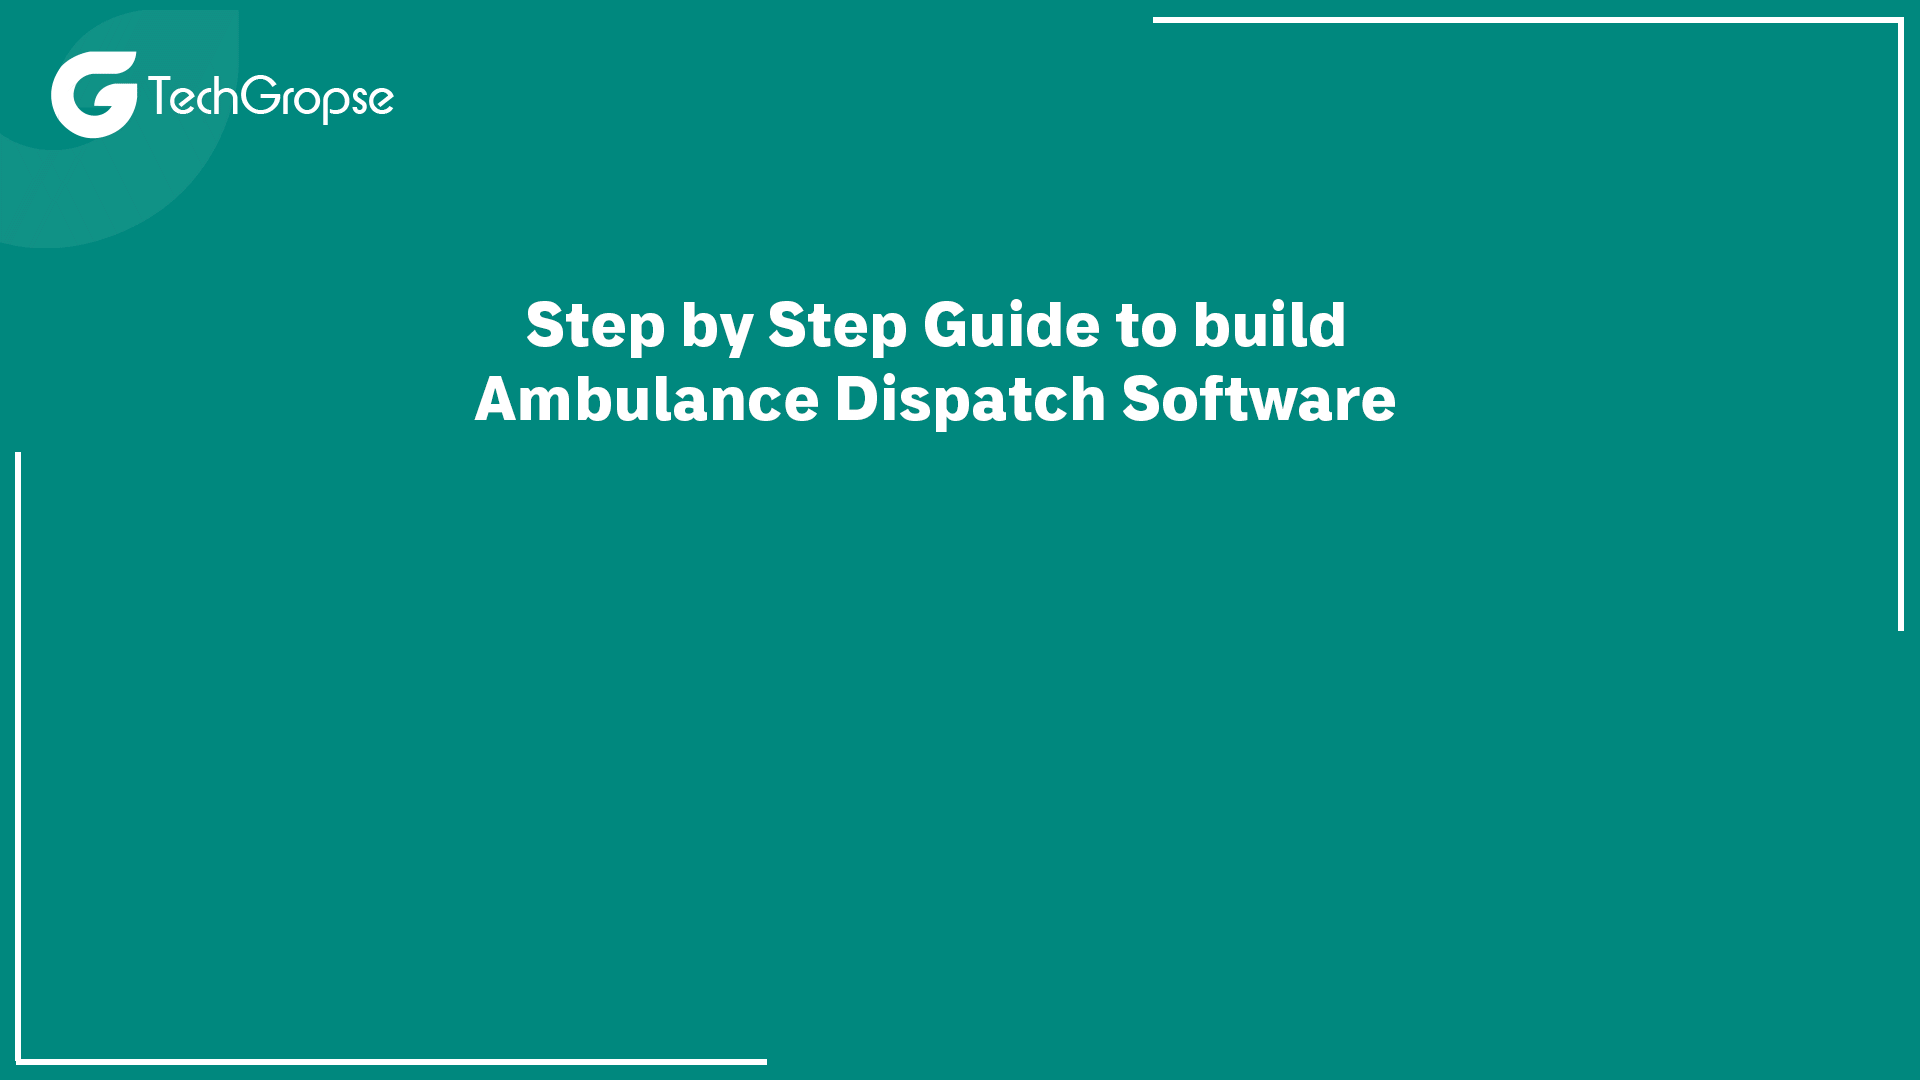 Step-by-Step Guide to Build Ambulance Dispatch Software